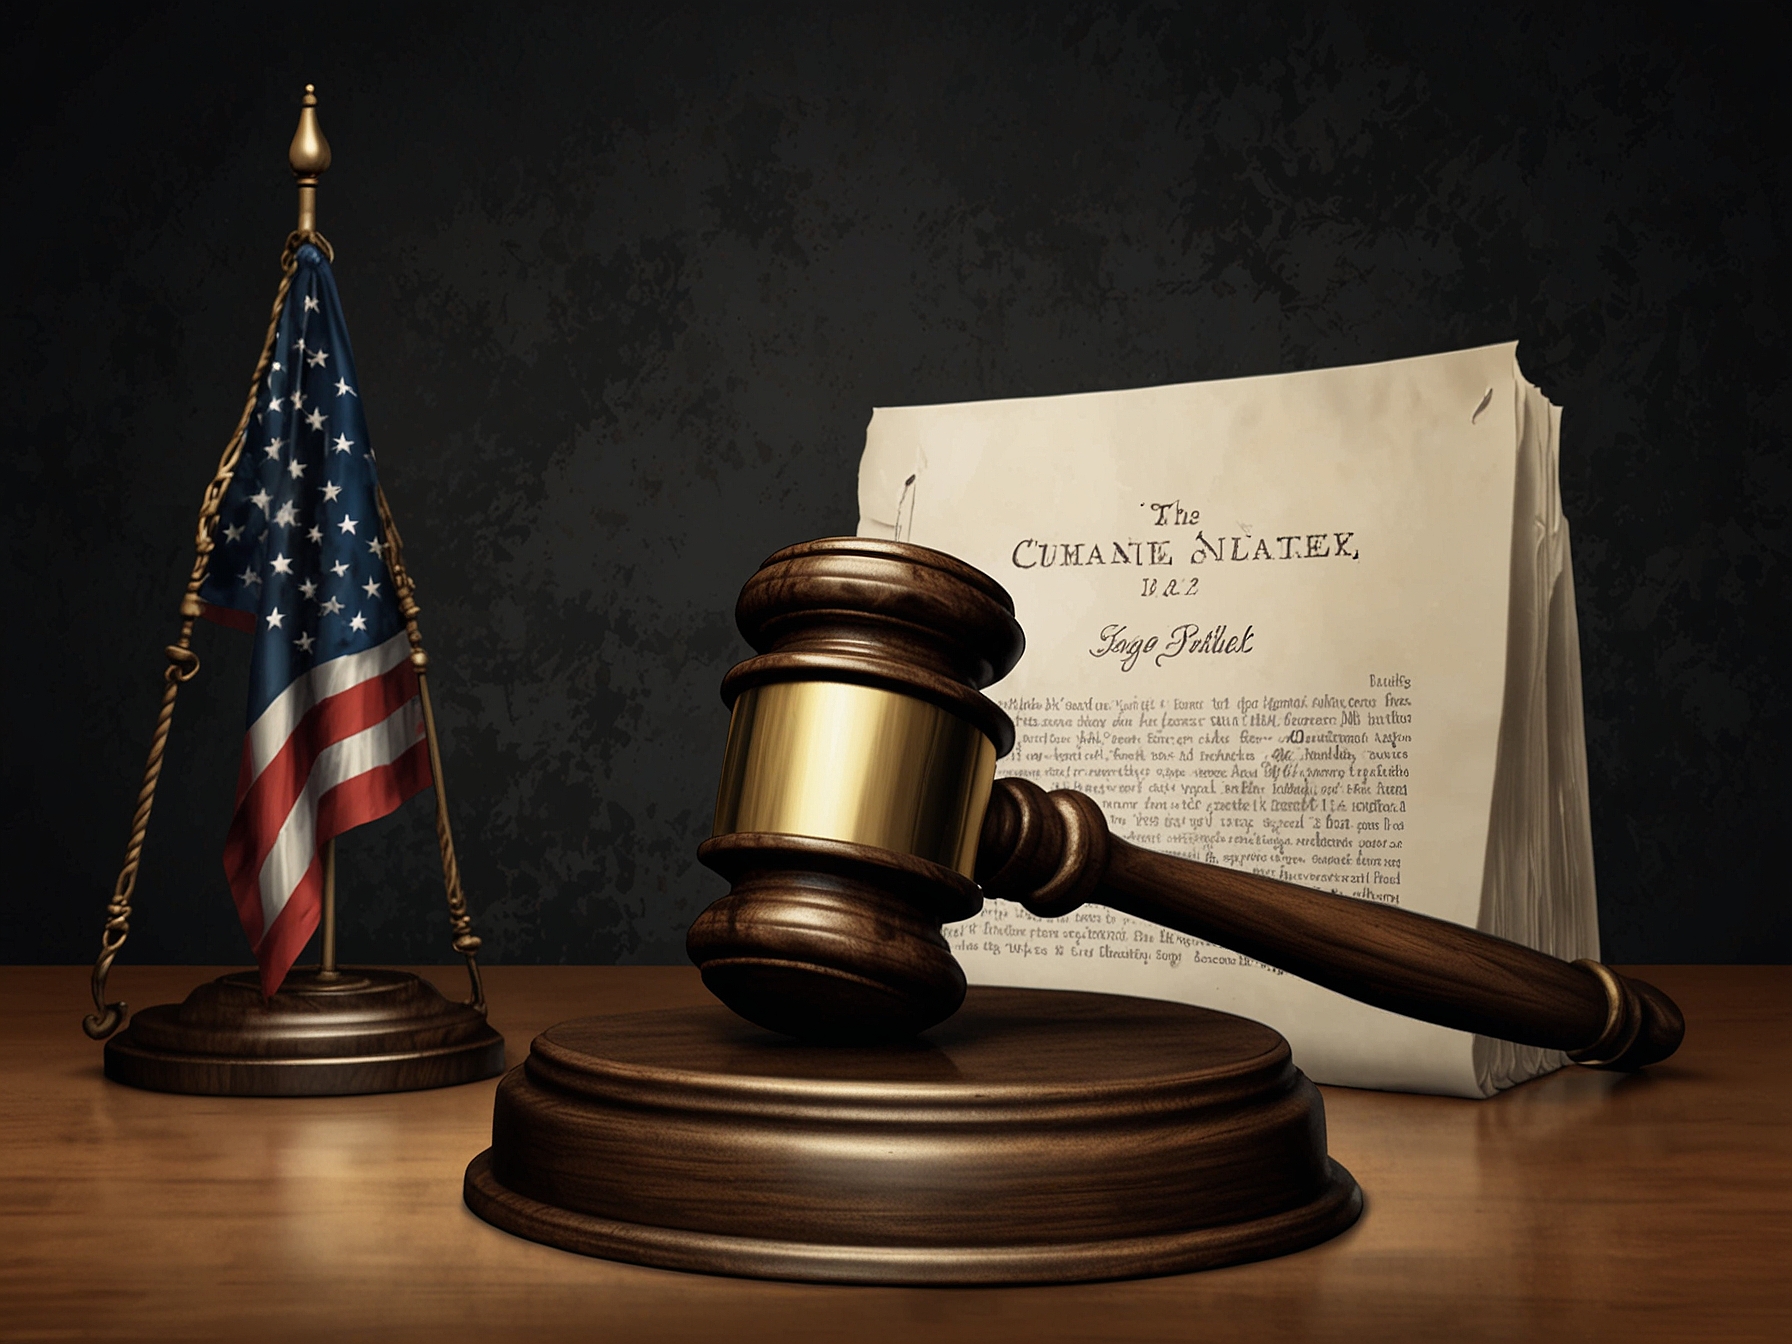 An illustration depicting a judge's gavel and a firearm, symbolizing the judicial balance between upholding the Second Amendment and enacting measures for public safety.